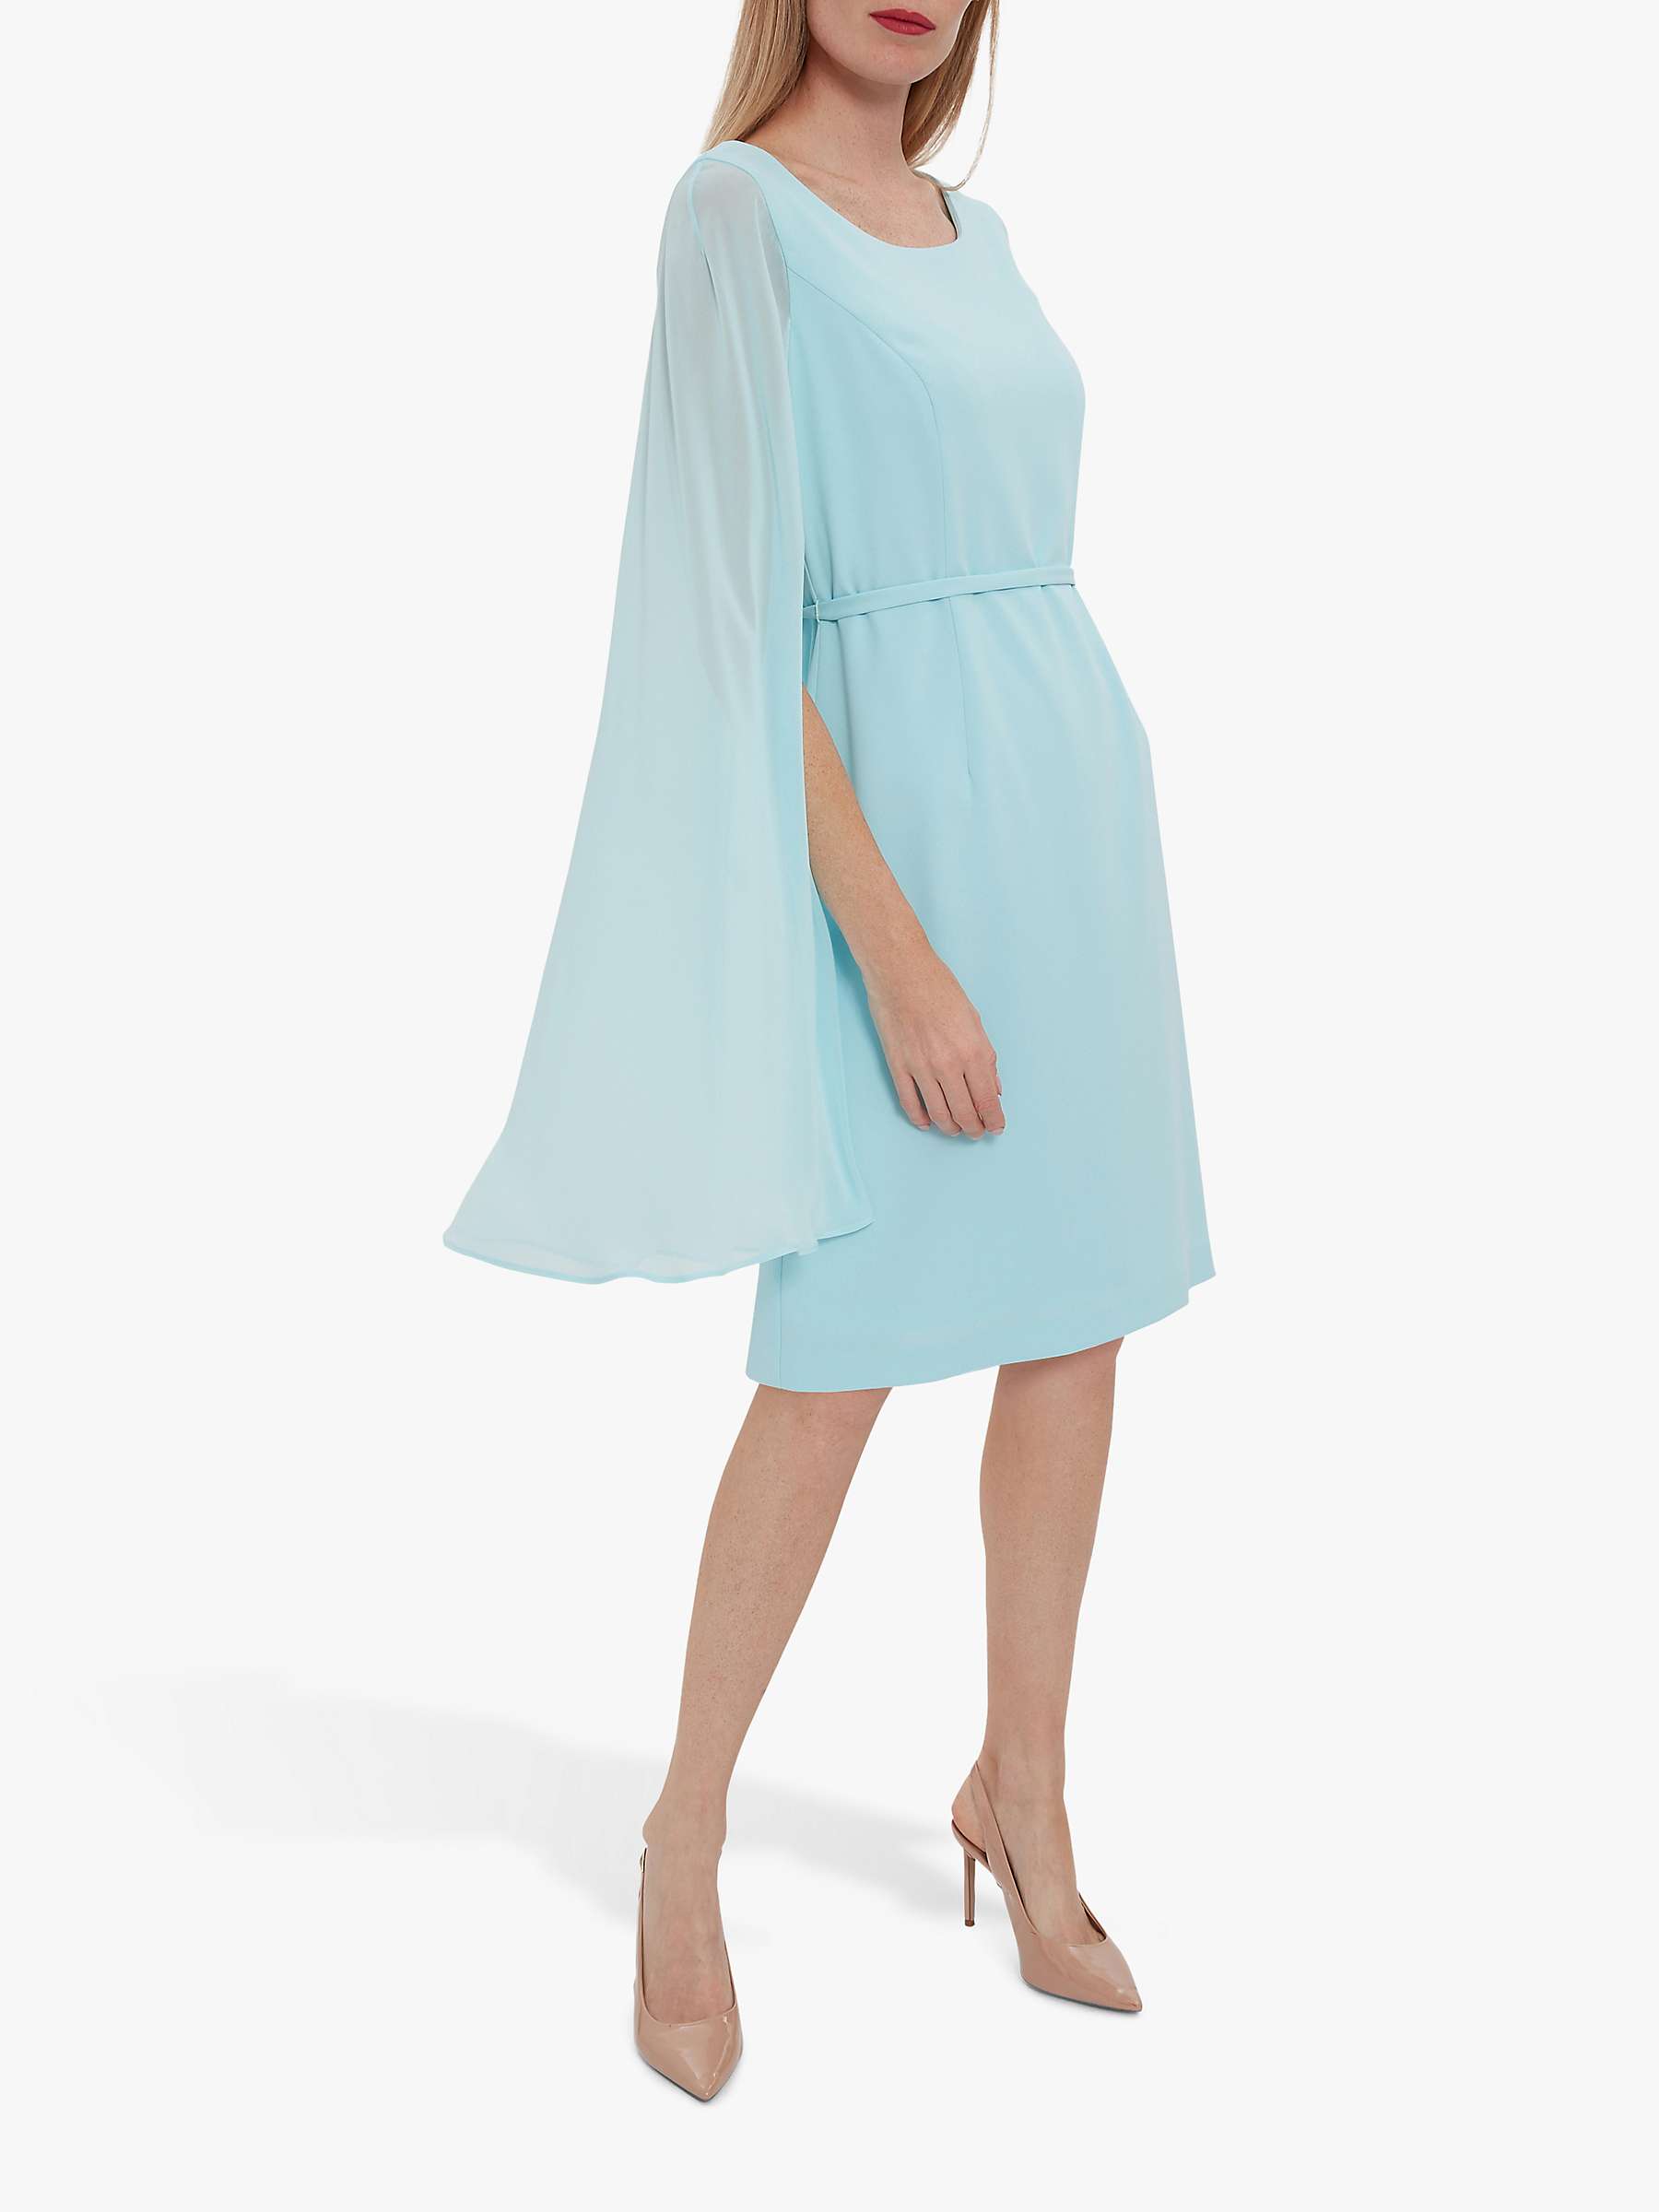 Buy Gina Bacconi Bevin Crepe And Chiffon Cape Dress Online at johnlewis.com